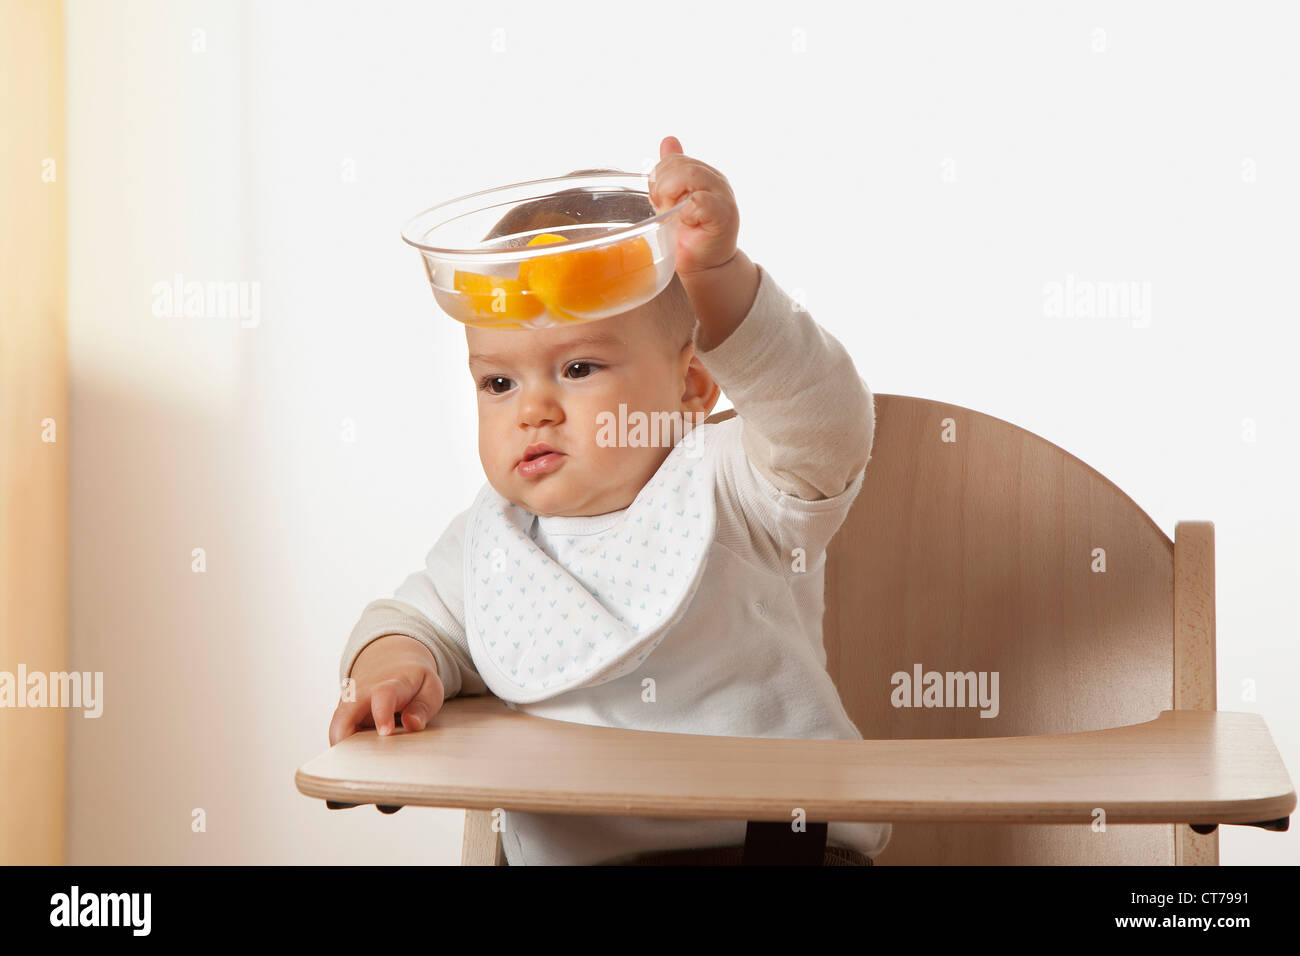 portrait of baby in high chair holding bowl with fruit Stock Photo